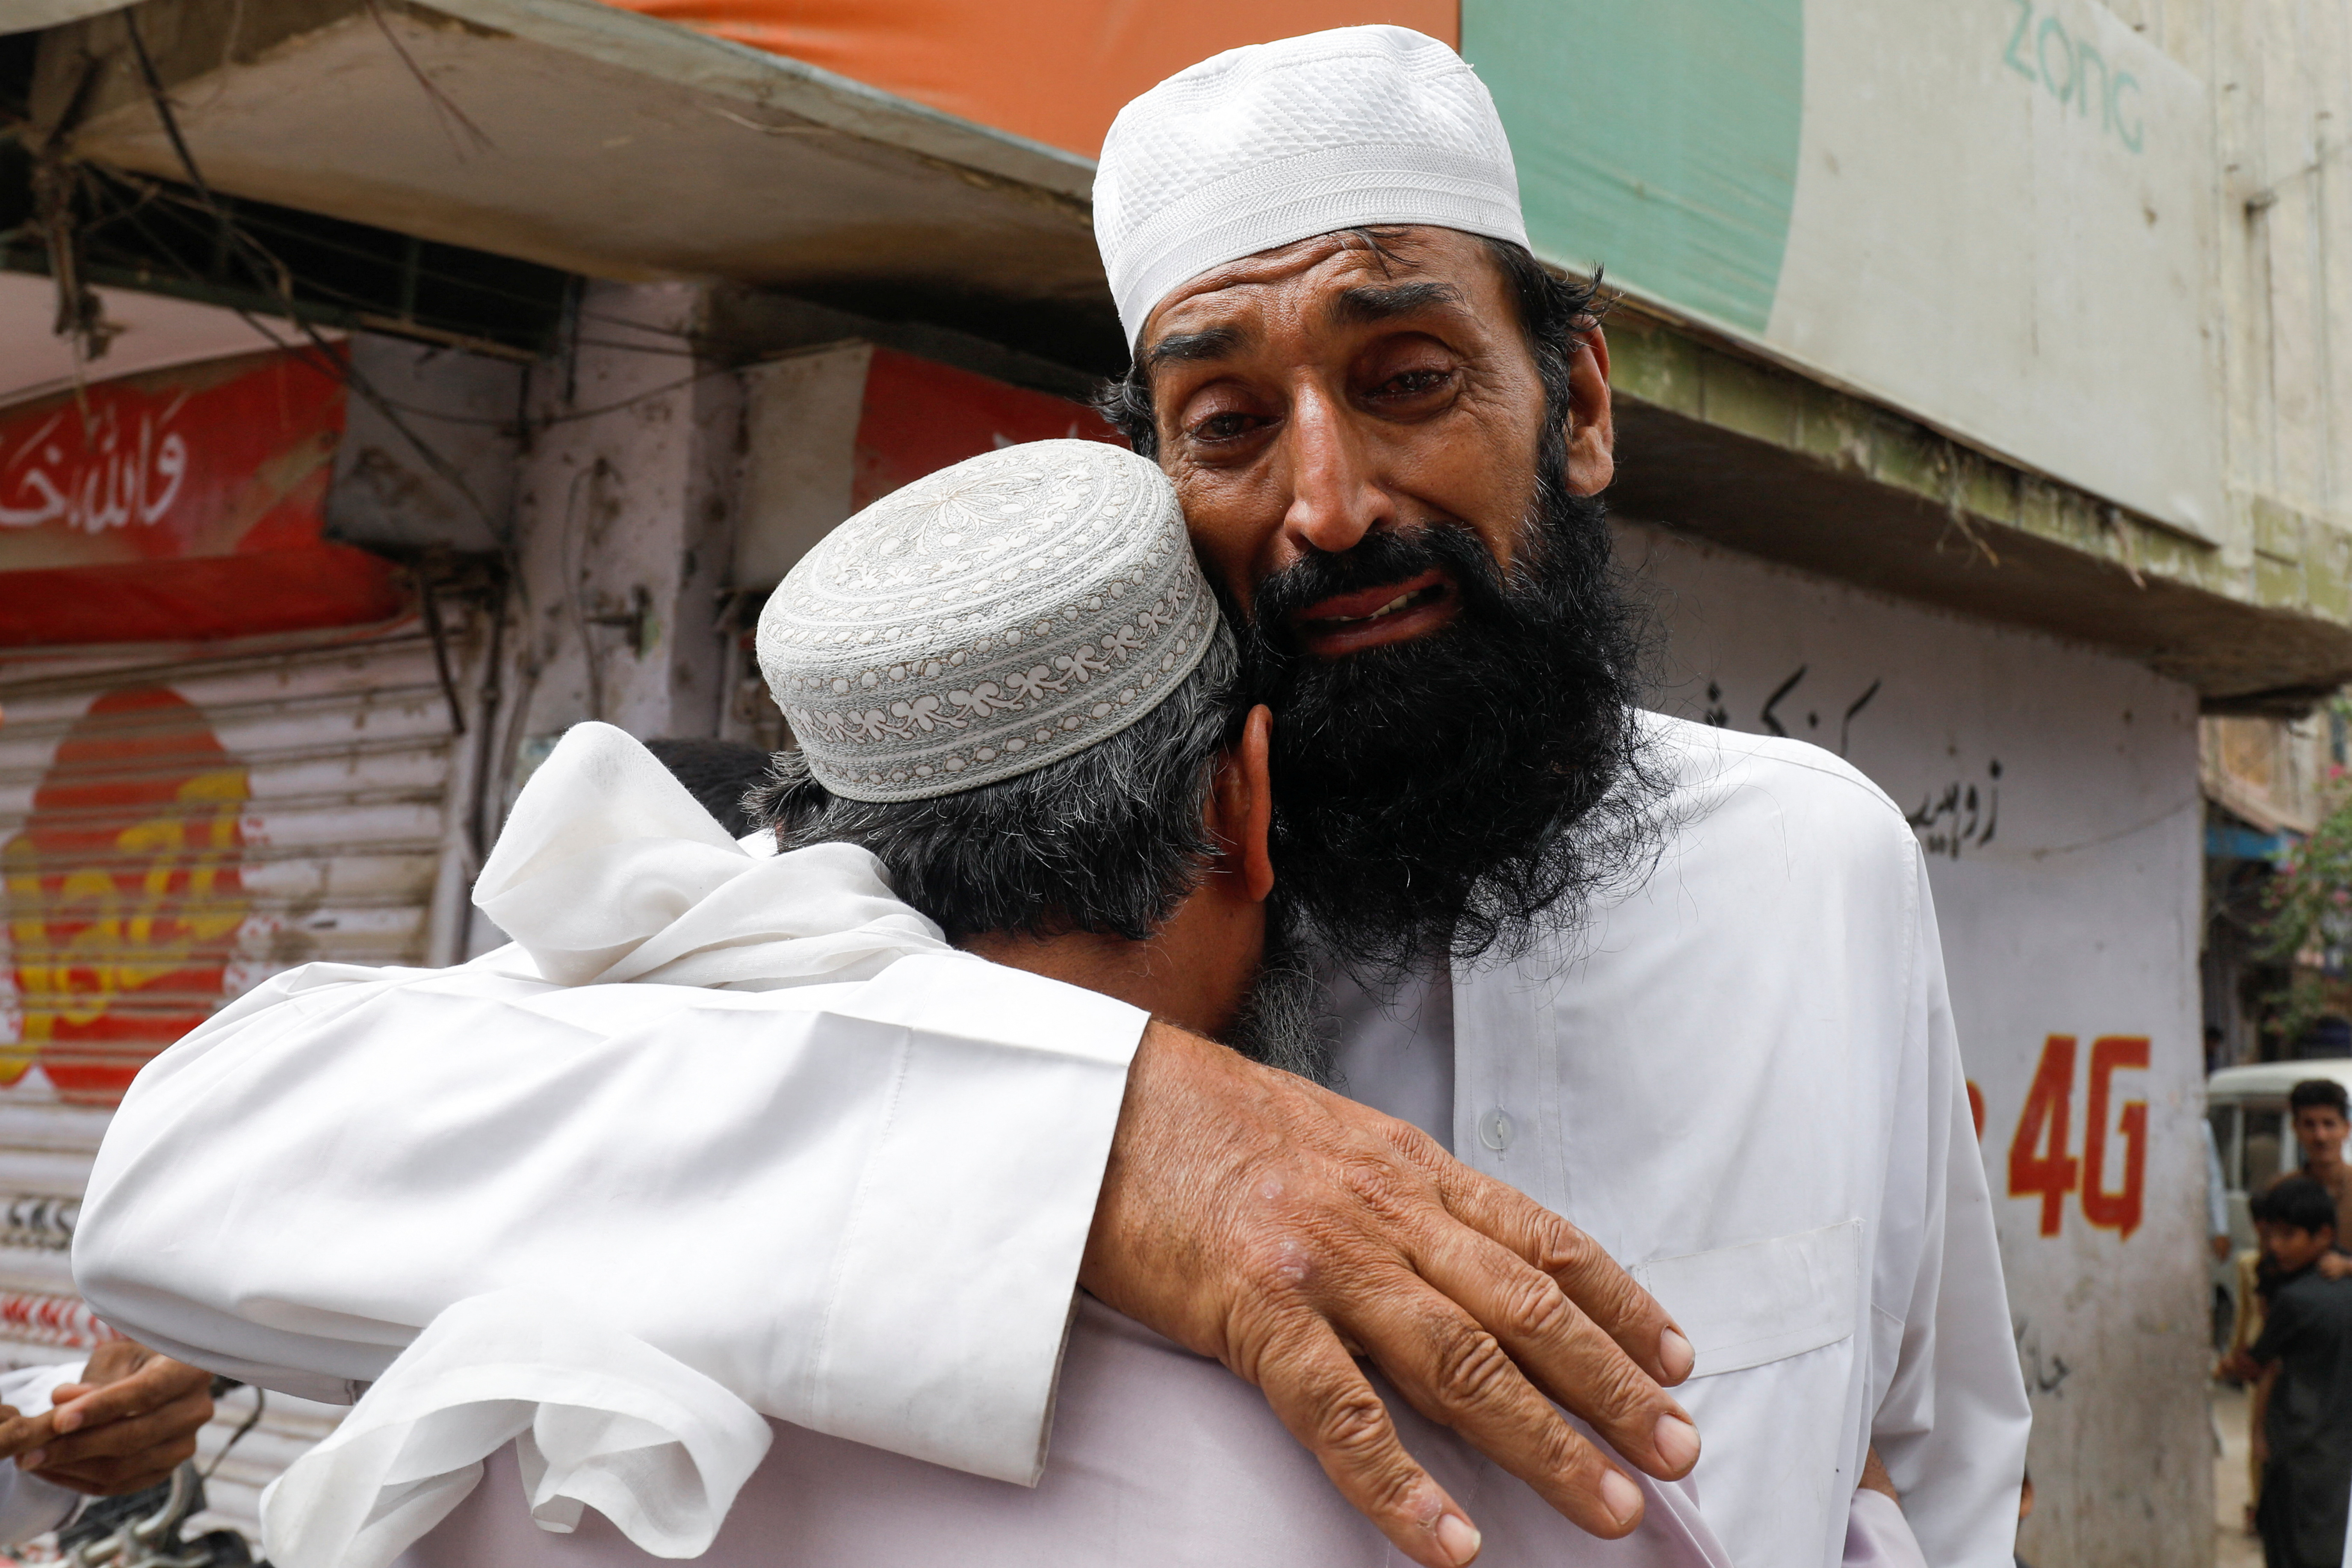 Umer Zada, father of seven year-old Saad Umer, who was killed with others in a stampede during handout distribution, mourns the death of his son during the funeral in Karachi